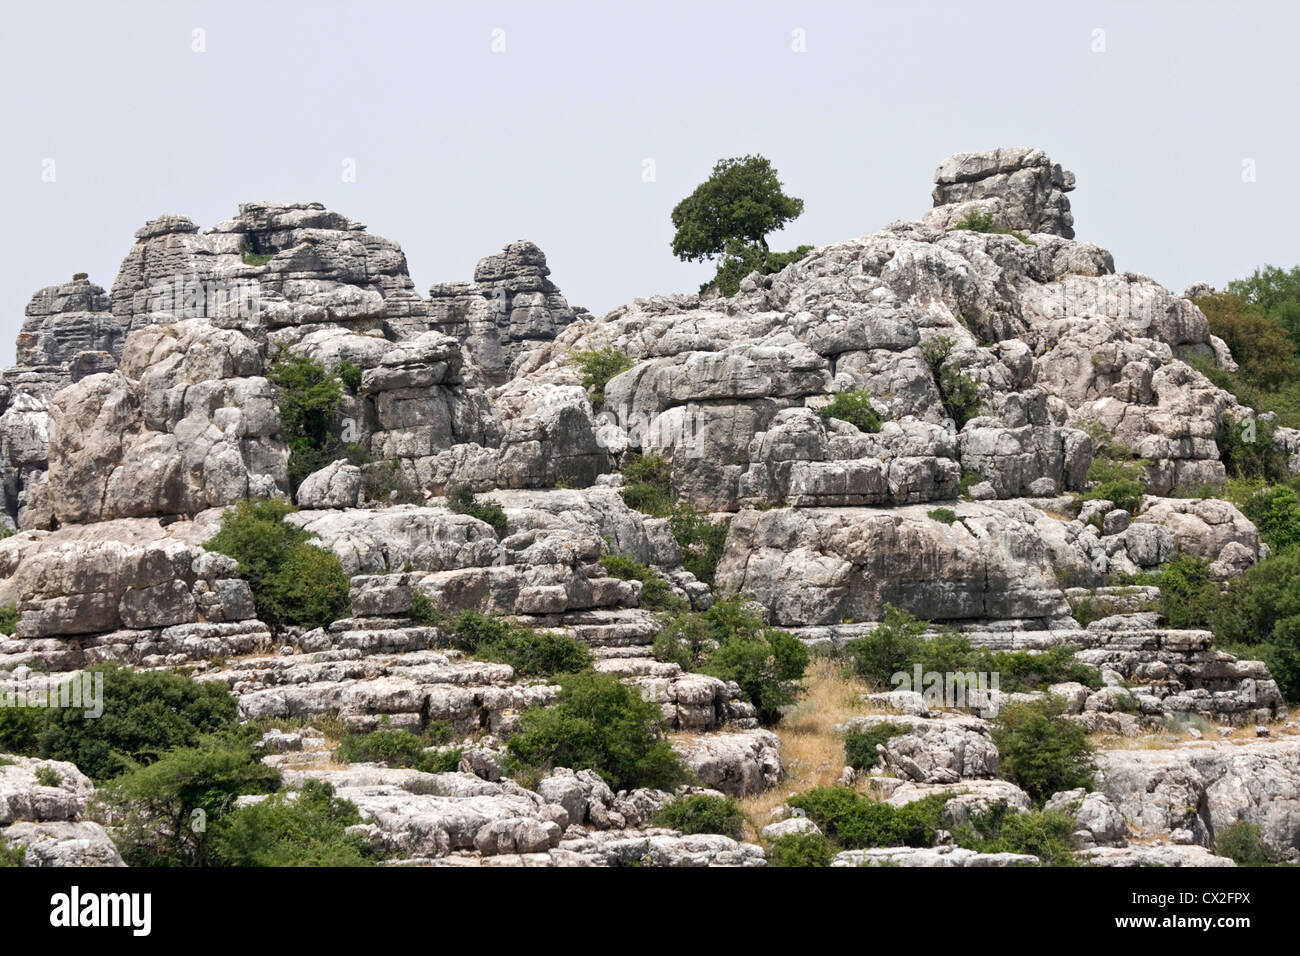 Rock formations in El Torcal Nature Reserve Antequera Malaga Spain Stock Photo